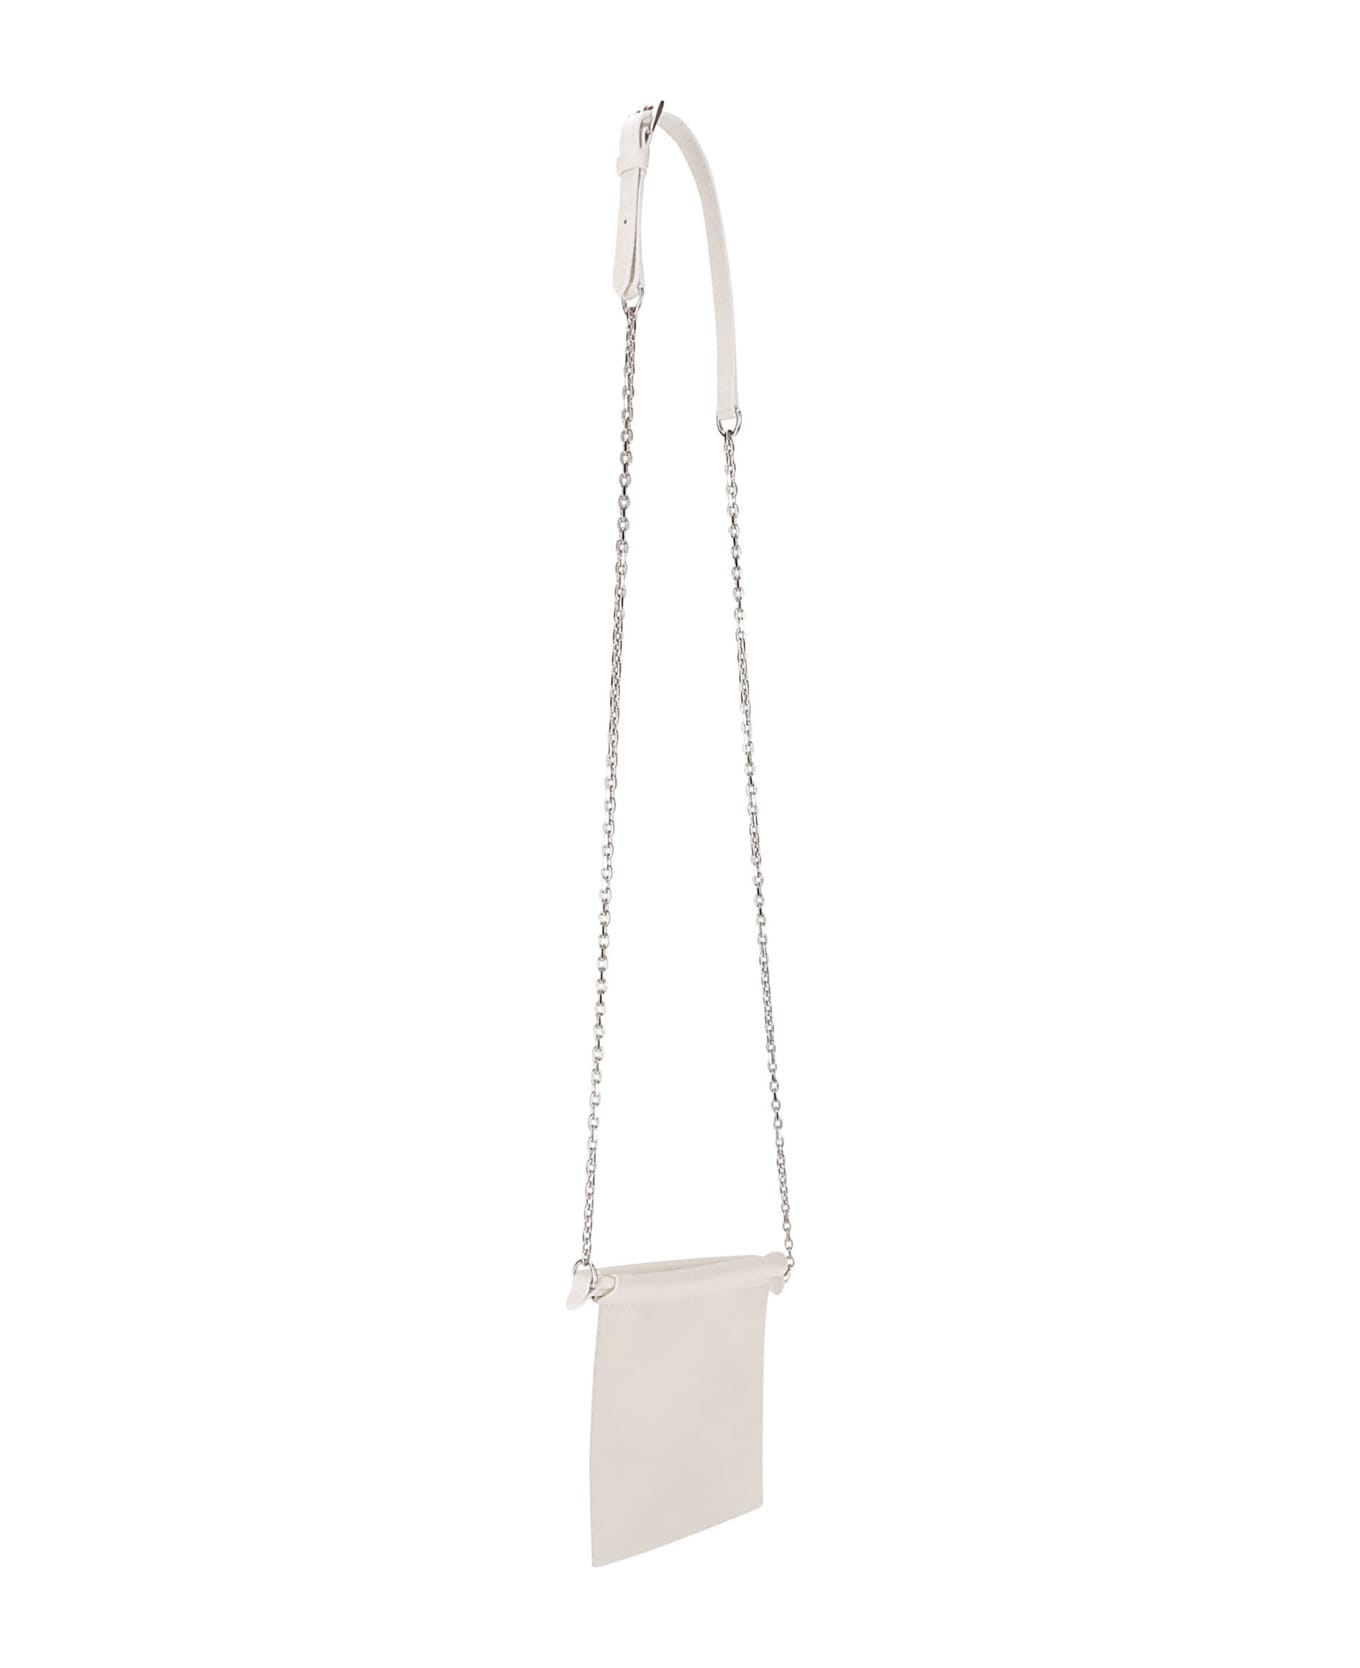 Maison Margiela Drawstring Phone Neck Pouch With Chain - WHITE